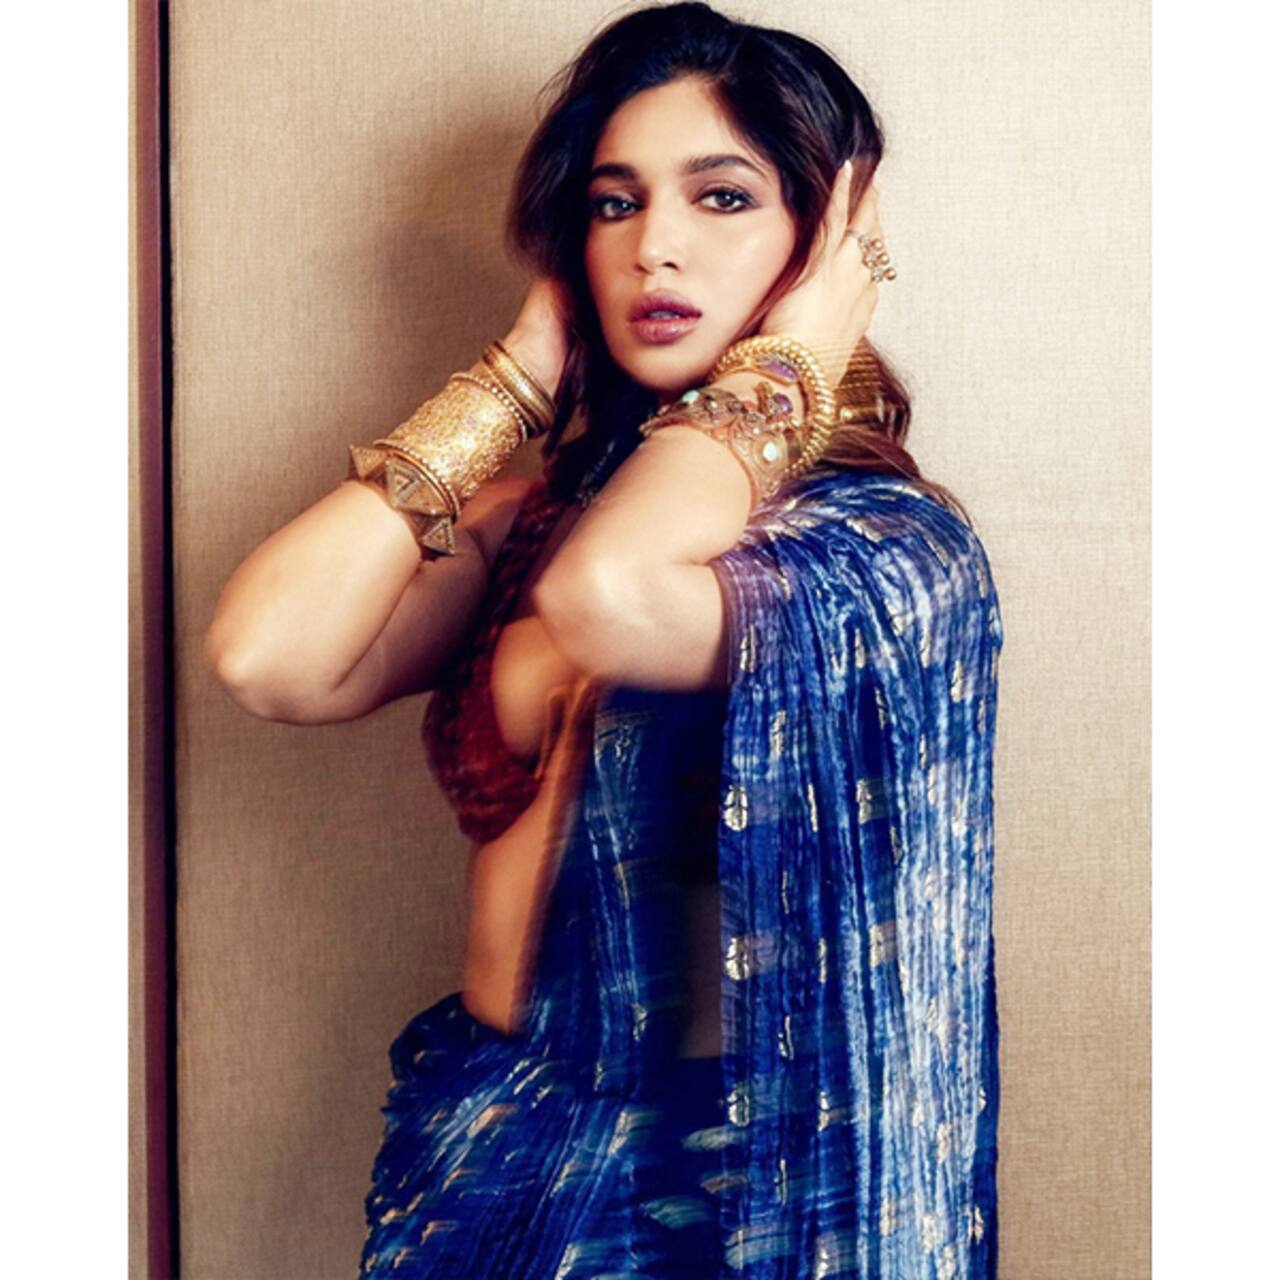 Bhumi Pednekar dropped these pictures on her Instagram looking bomb